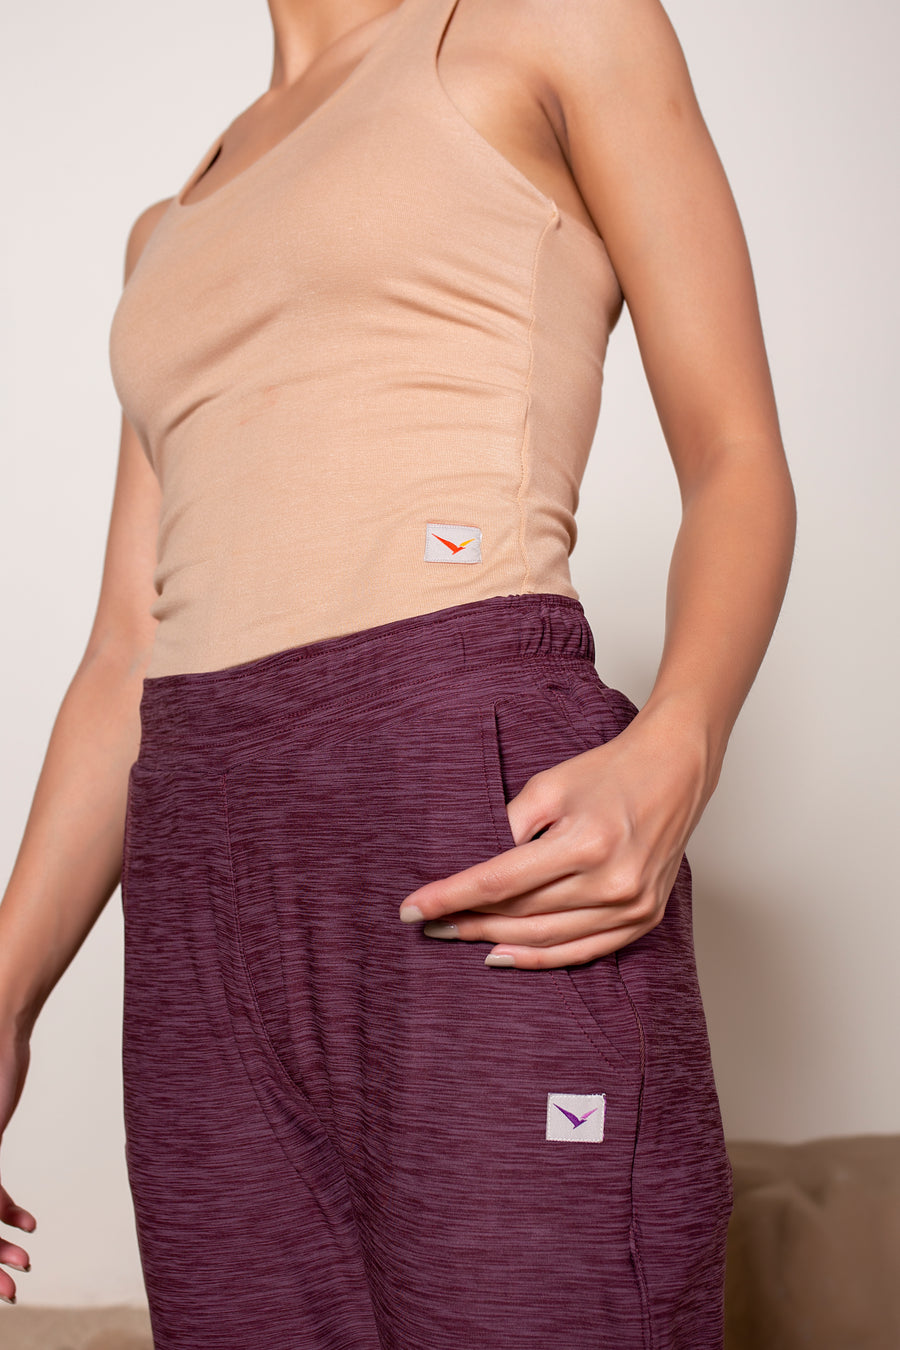 Women's Railay Yoga Jogger in Burgundy | VOLO Apparel | Railay Yoga Joggers have a slim but relaxed fit with a slightly cropped leg, hidden zippered pocket, deep side pockets, a secure cell phone pocket with a snap button and an internal drawstring. Designed with our premium peached four way stretch fabric, they're your new go-to yoga and do everything joggers.